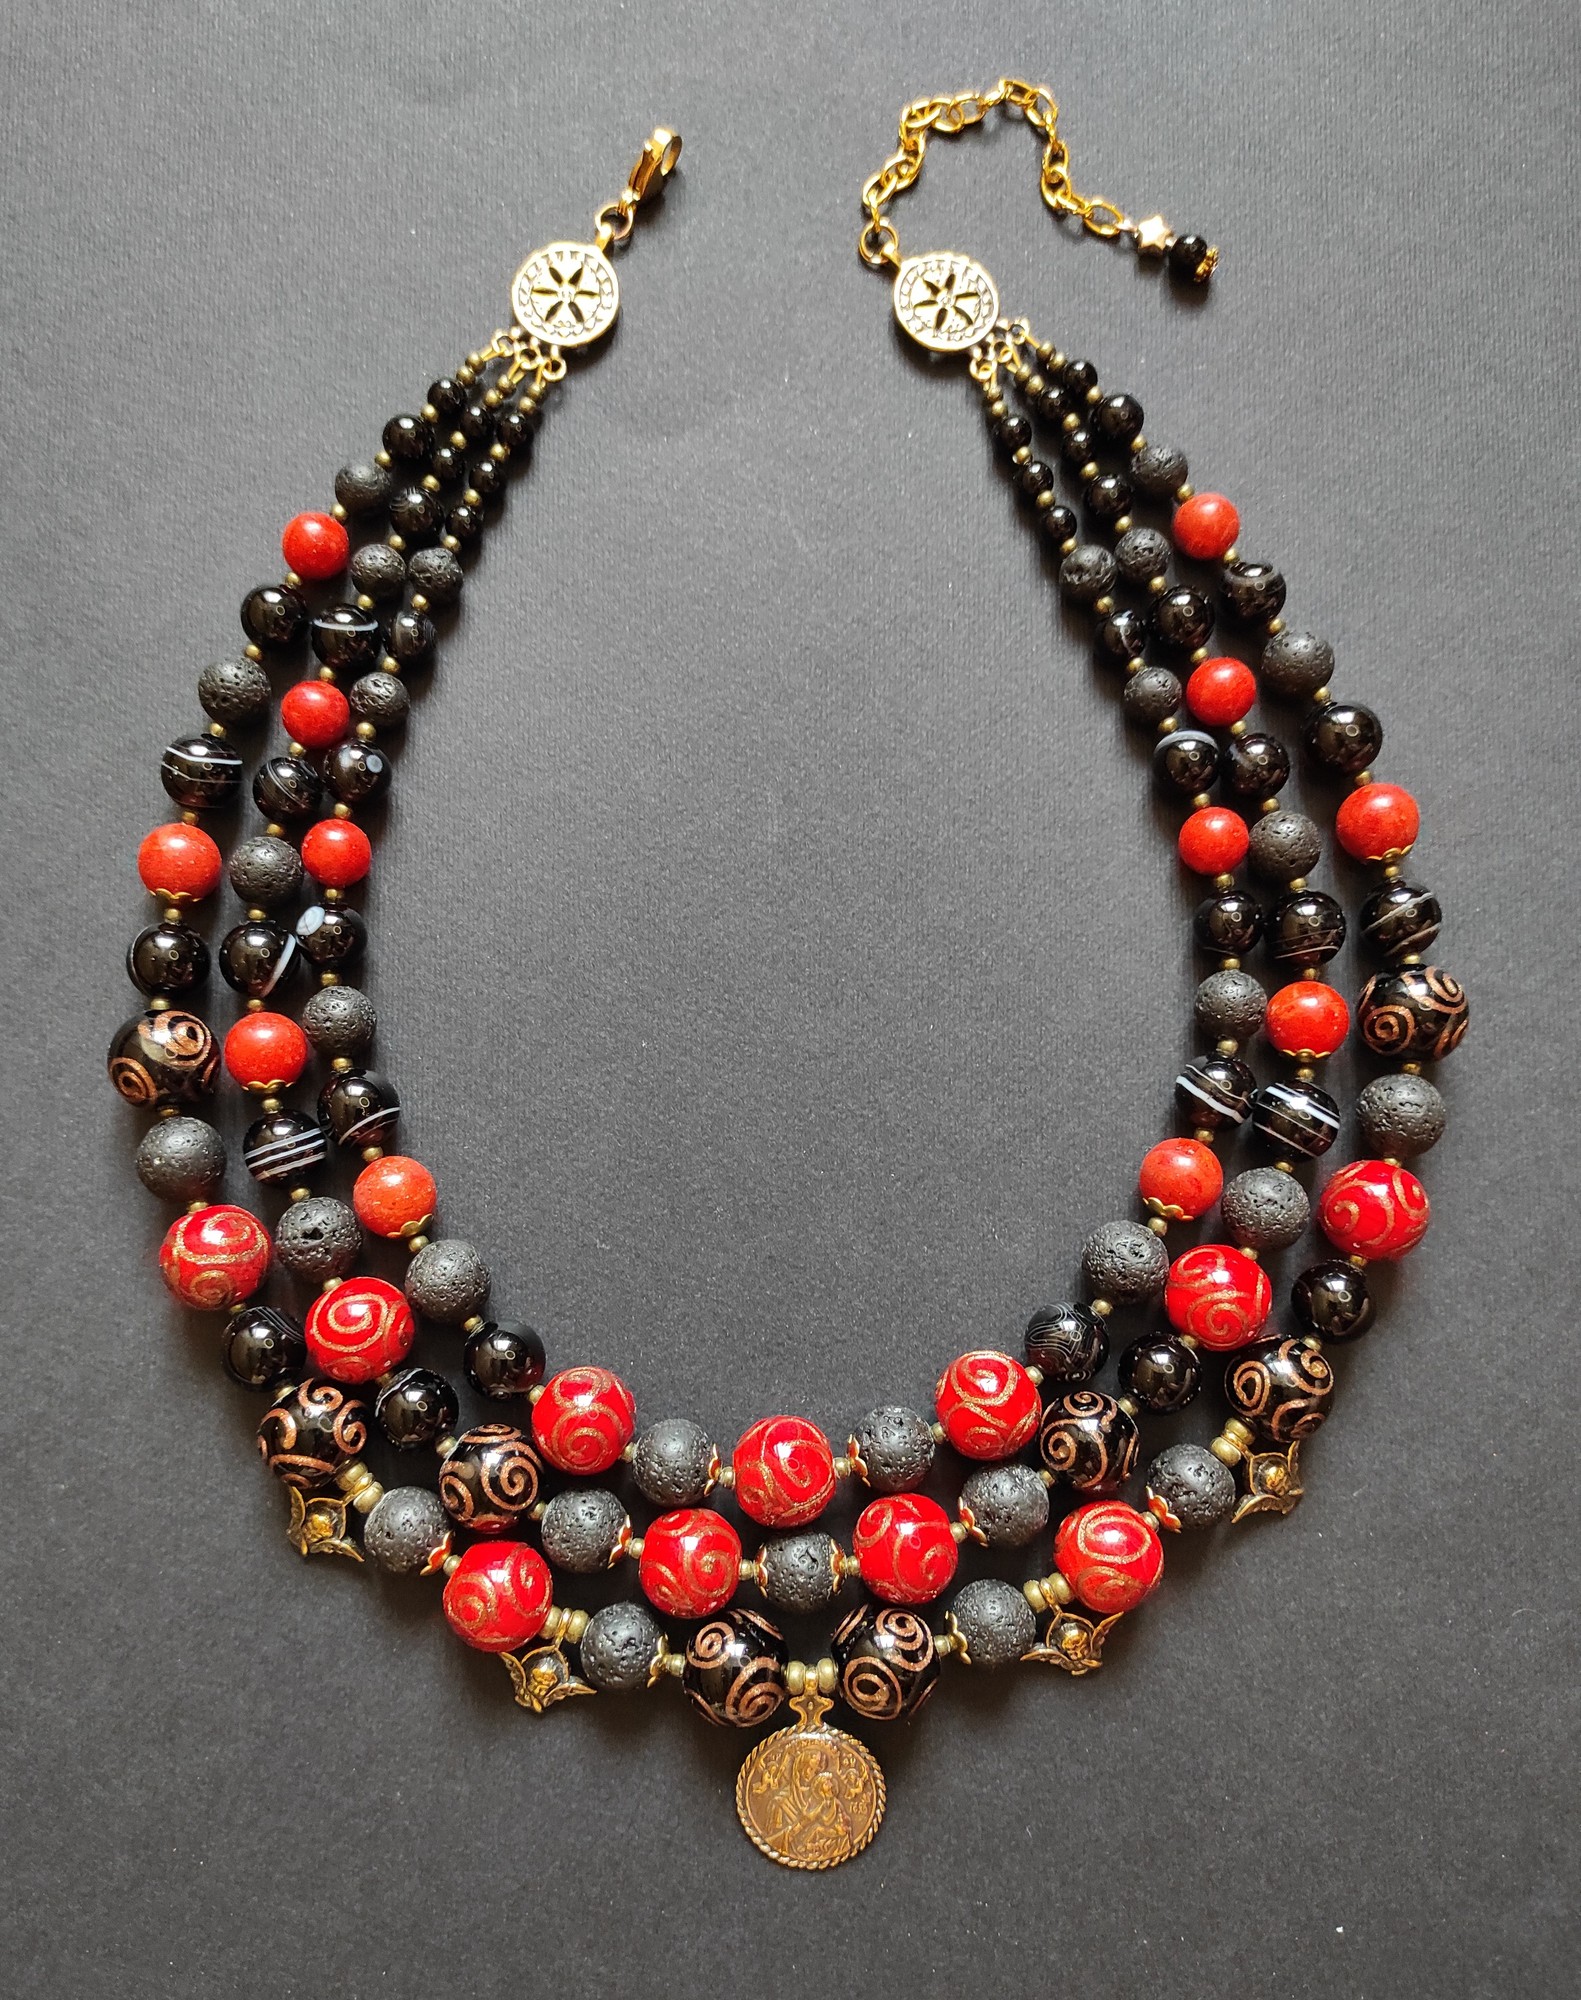 Necklace "Ukrainian indestructibility" from glass beads, agate, lava and coral